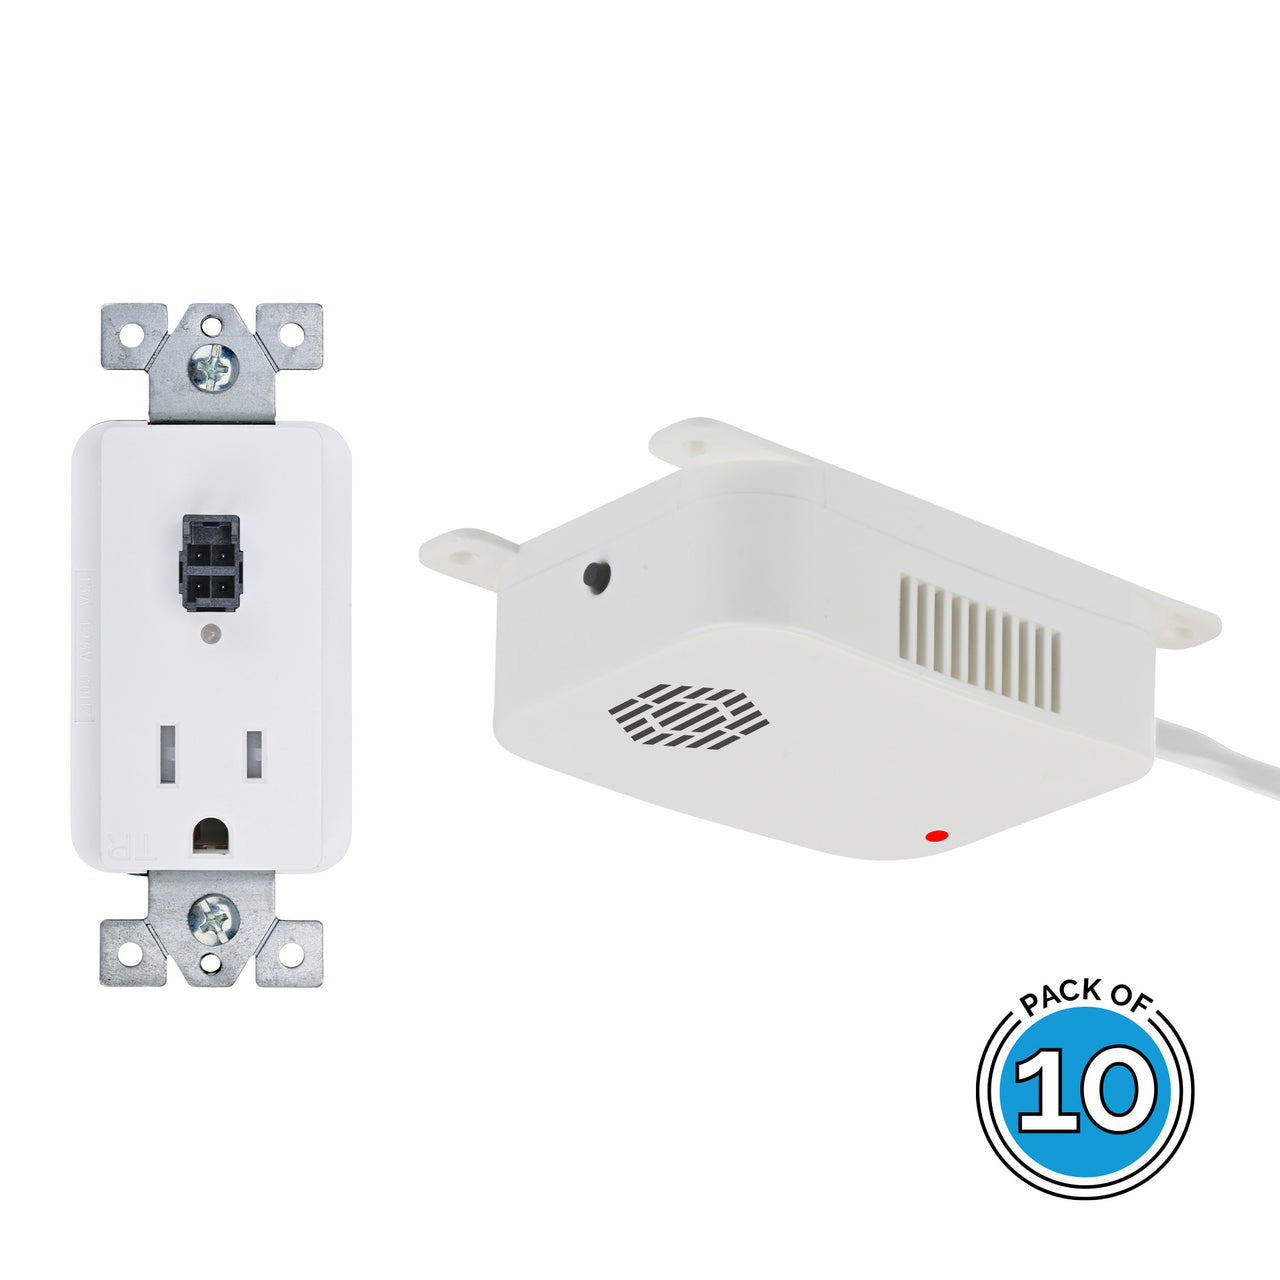 Fire Guard Outlet (formerly known as Safety Interlock Outlet with Smoke and Heat Sensor)